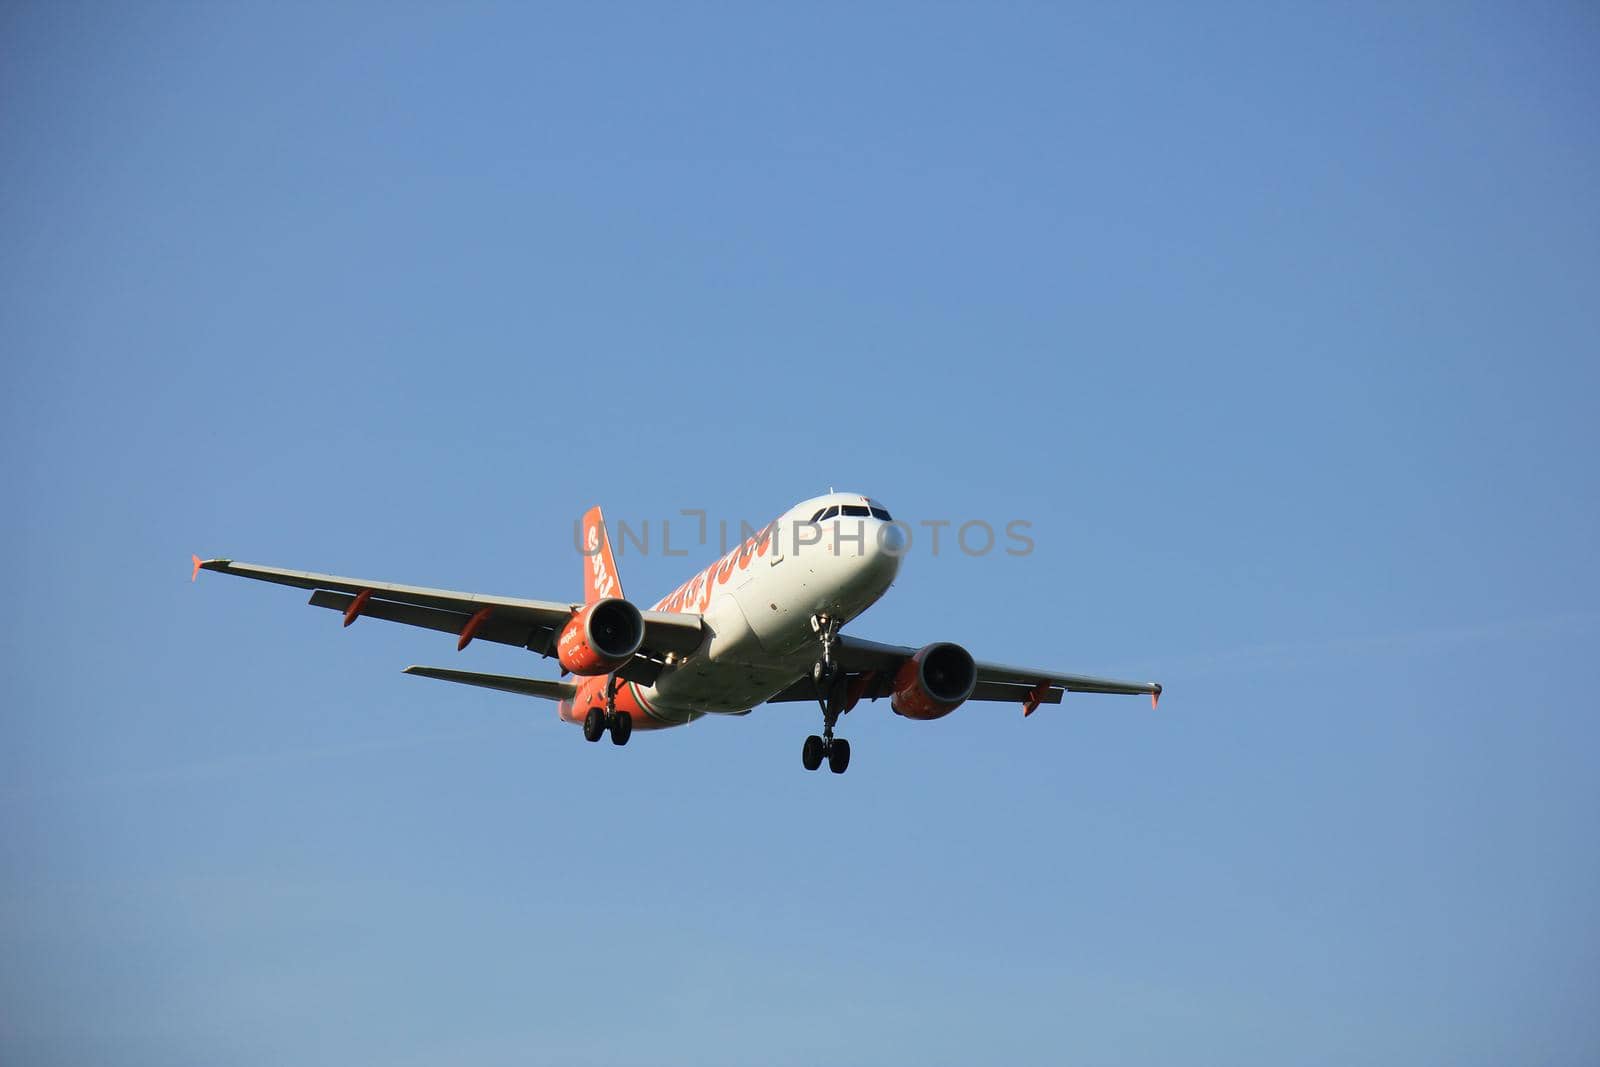 Amsterdam the Netherlands - May, 6th 2016: G-EZIW easyJet Airbus A319 approaching Schiphol Zwanenburg runway 18C, arriving from Toulouse, France